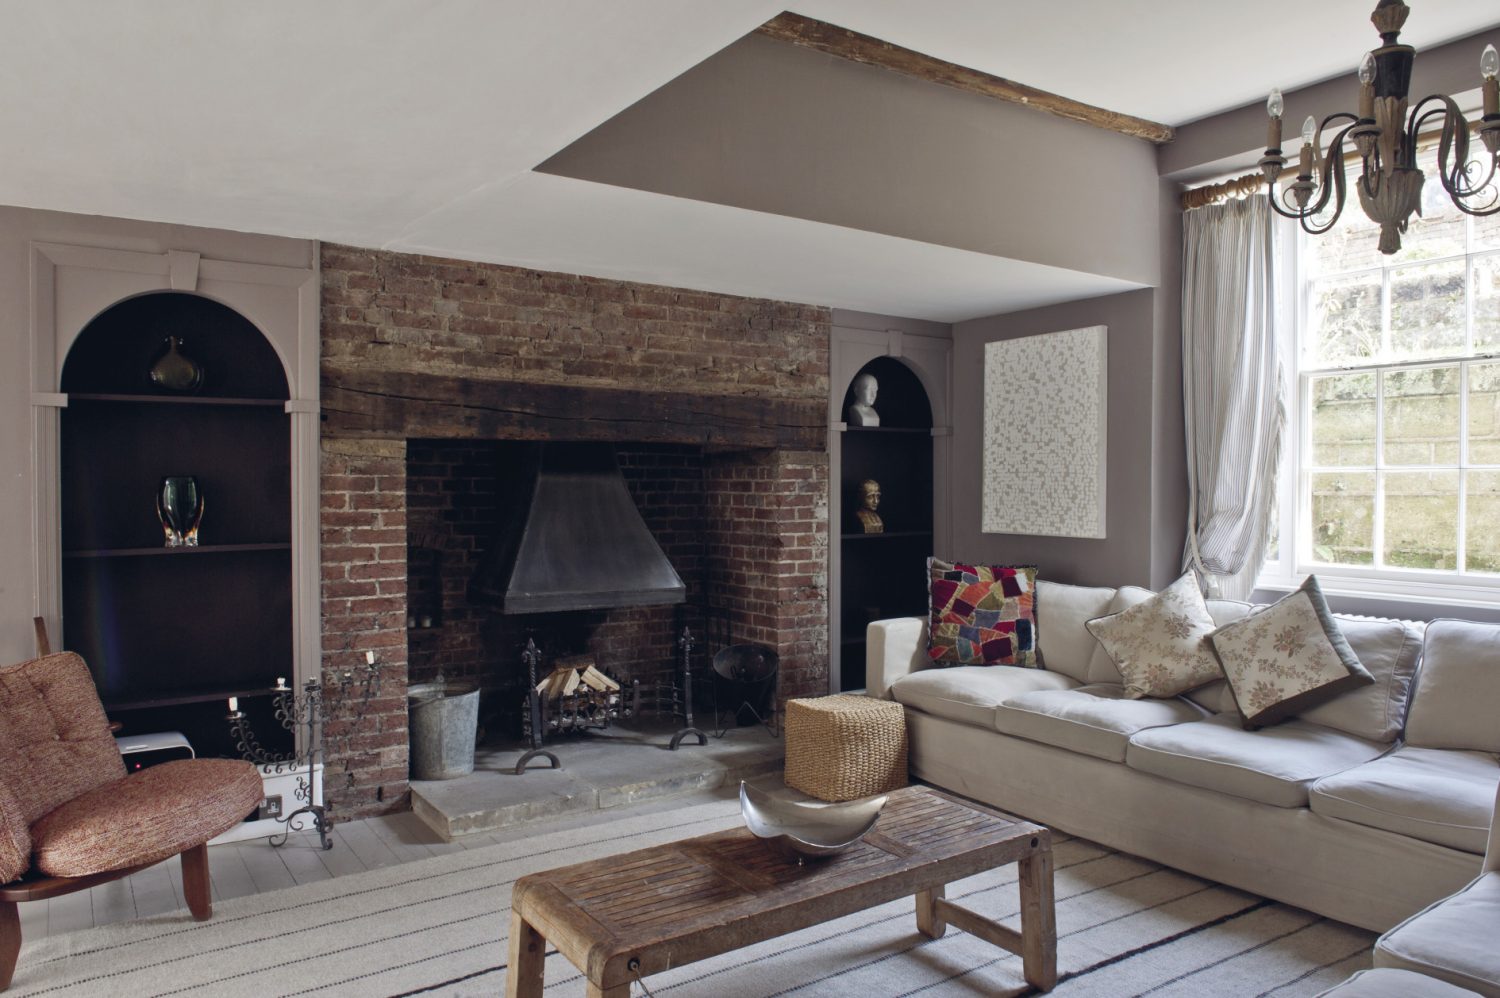 At the other end of the sitting room, two huge comfortable sofas are placed around an original inglenook where log fires burn in the winter months